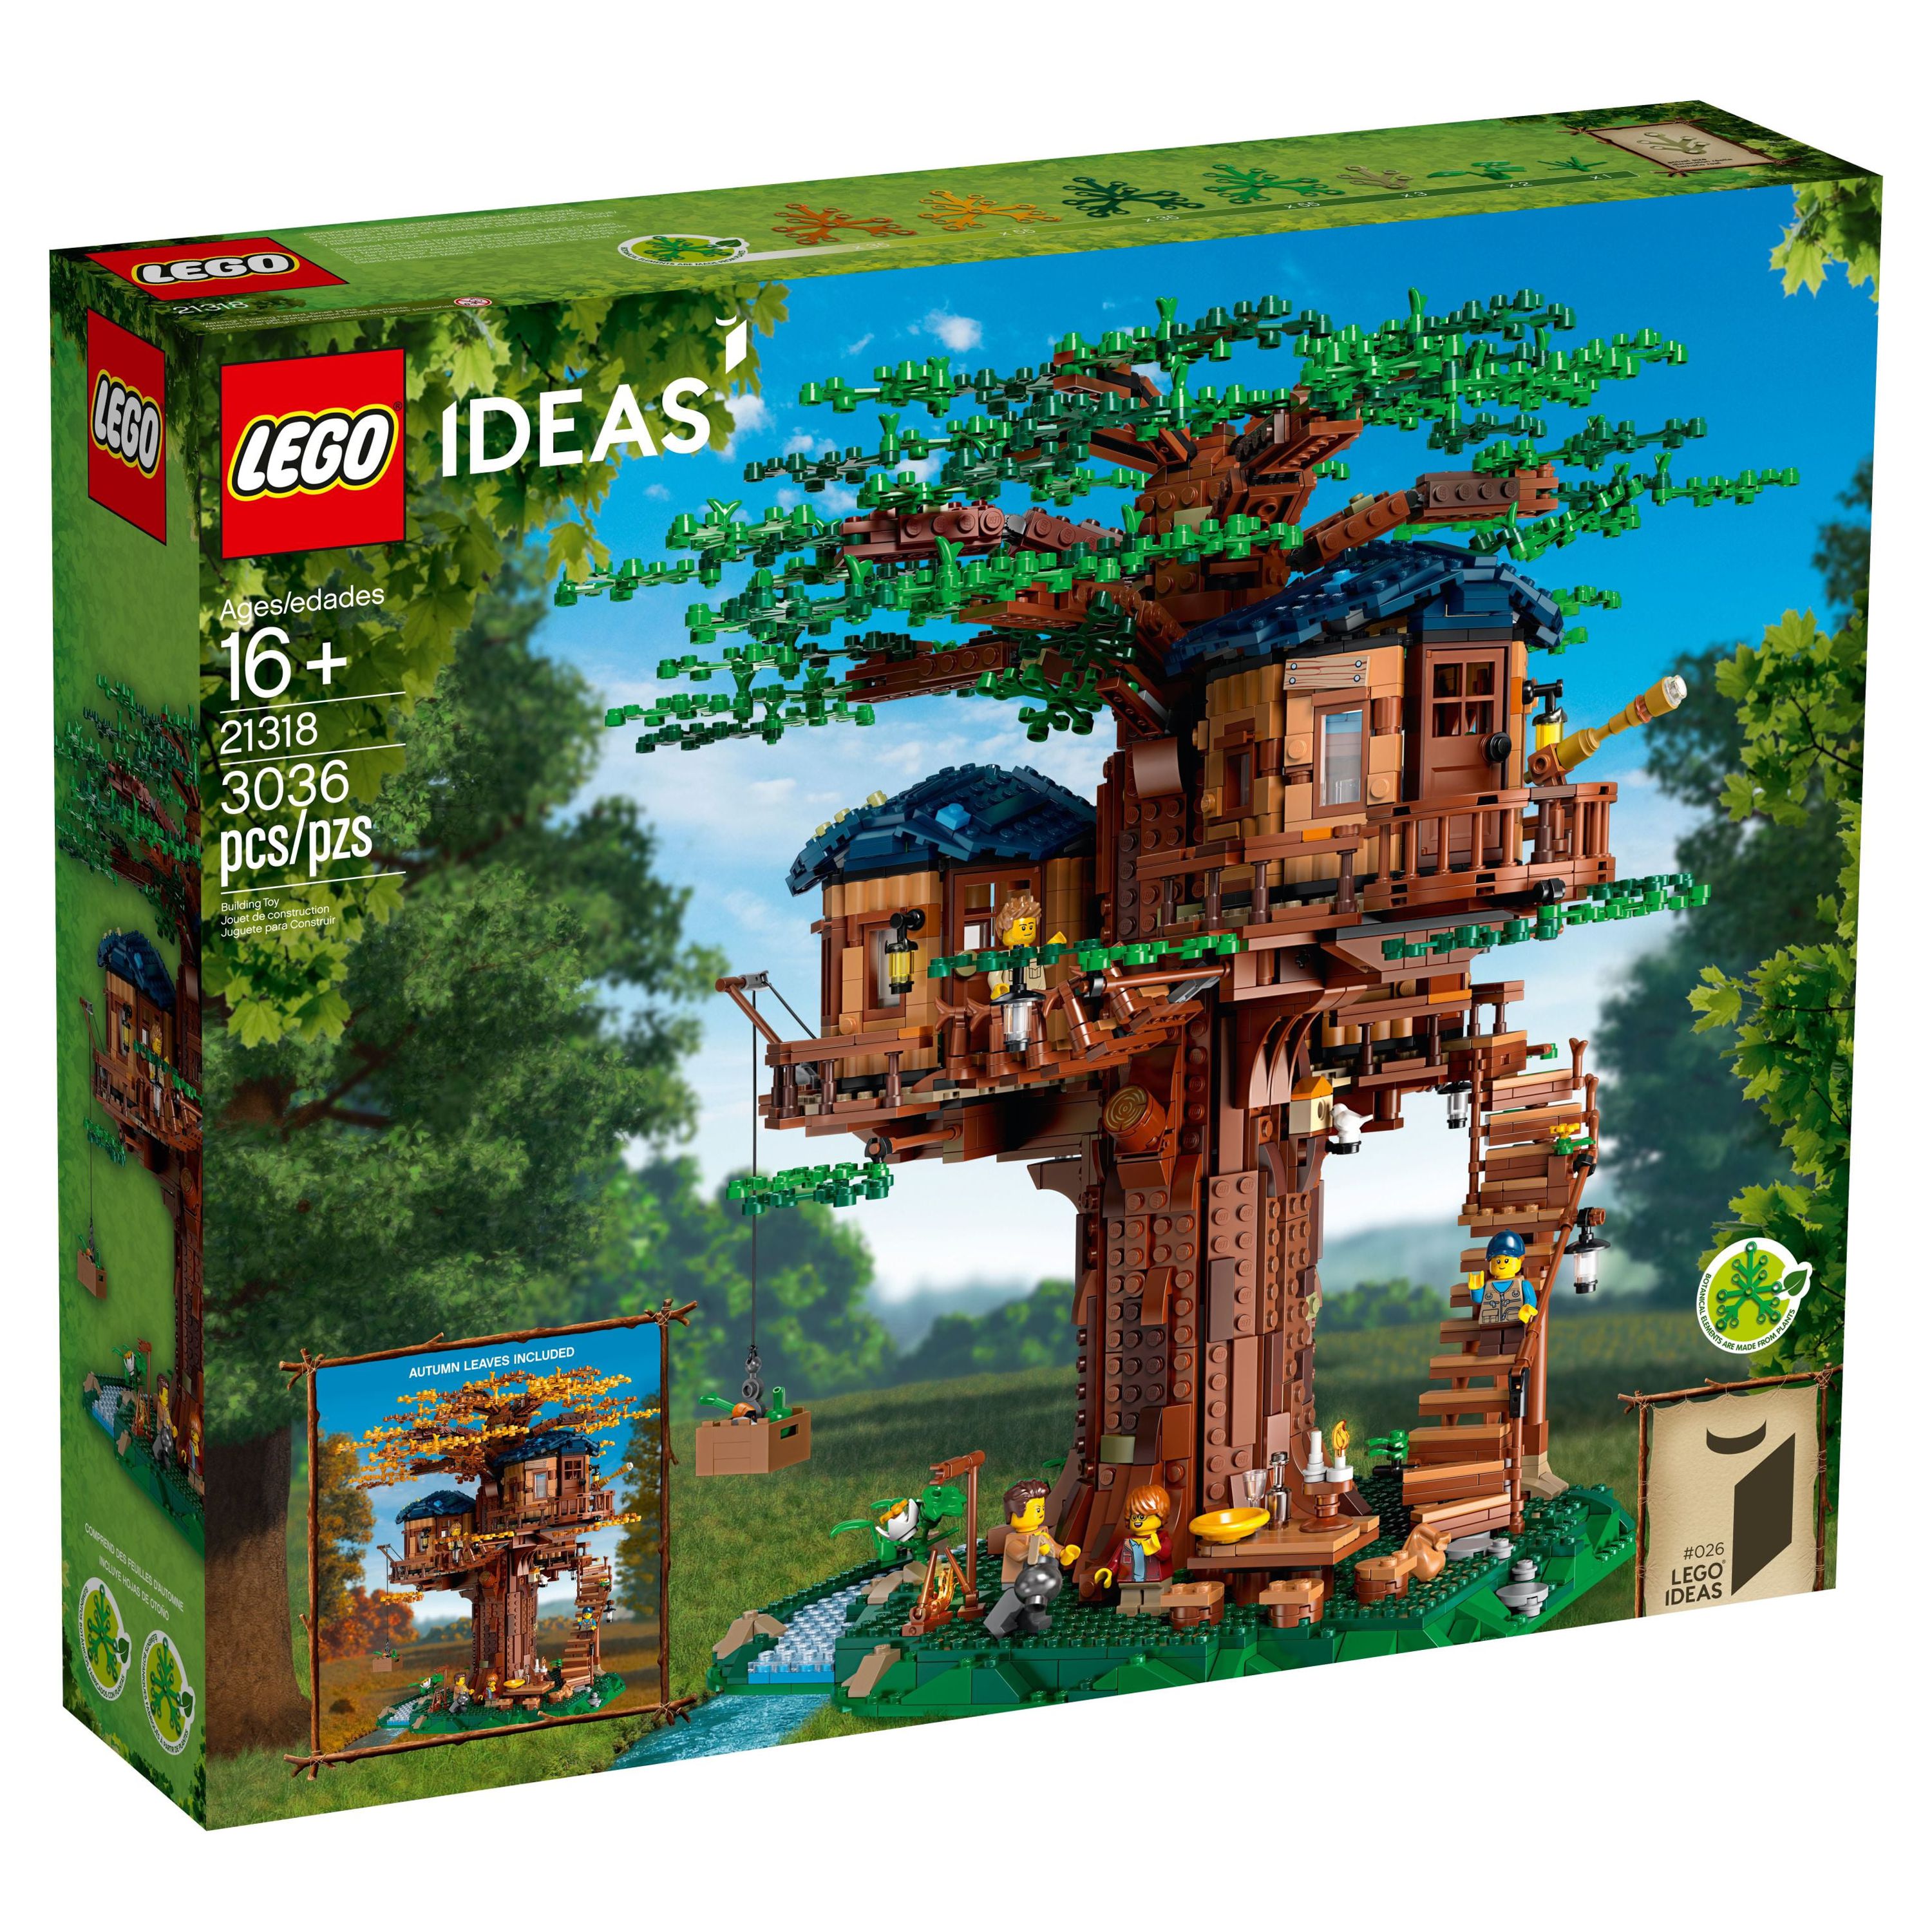 LEGO Ideas Tree House 21318, Model Construction Set for 16 Plus Year Olds with 3 Cabins, Interchangeable Leaves, Minifigures and a Bird Figure - image 4 of 8